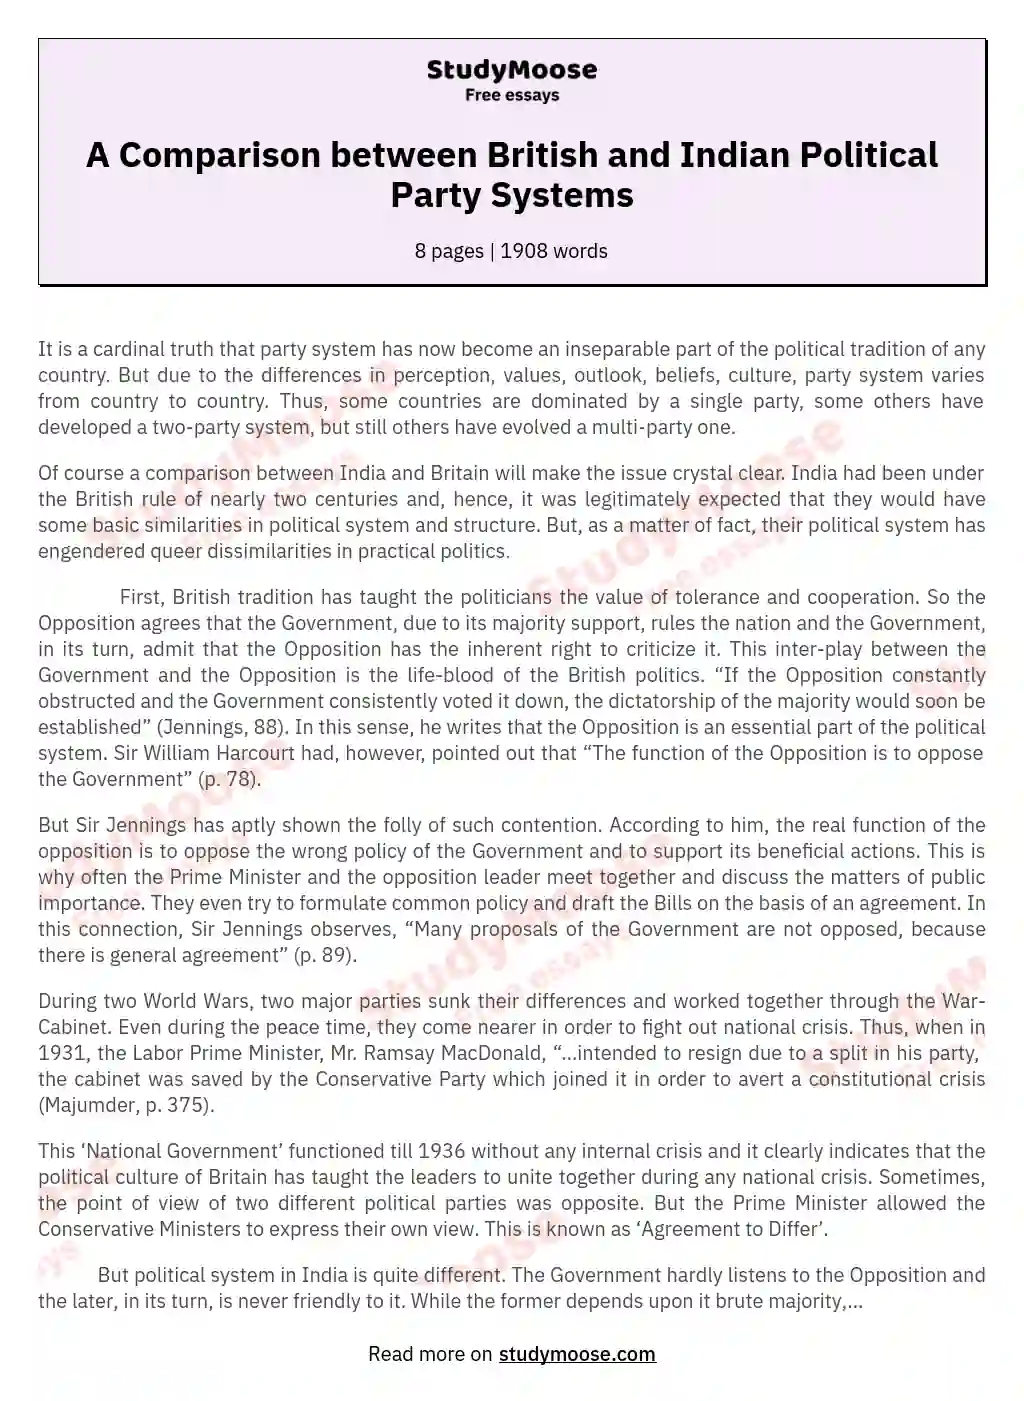 A Comparison between British and Indian Political Party Systems essay